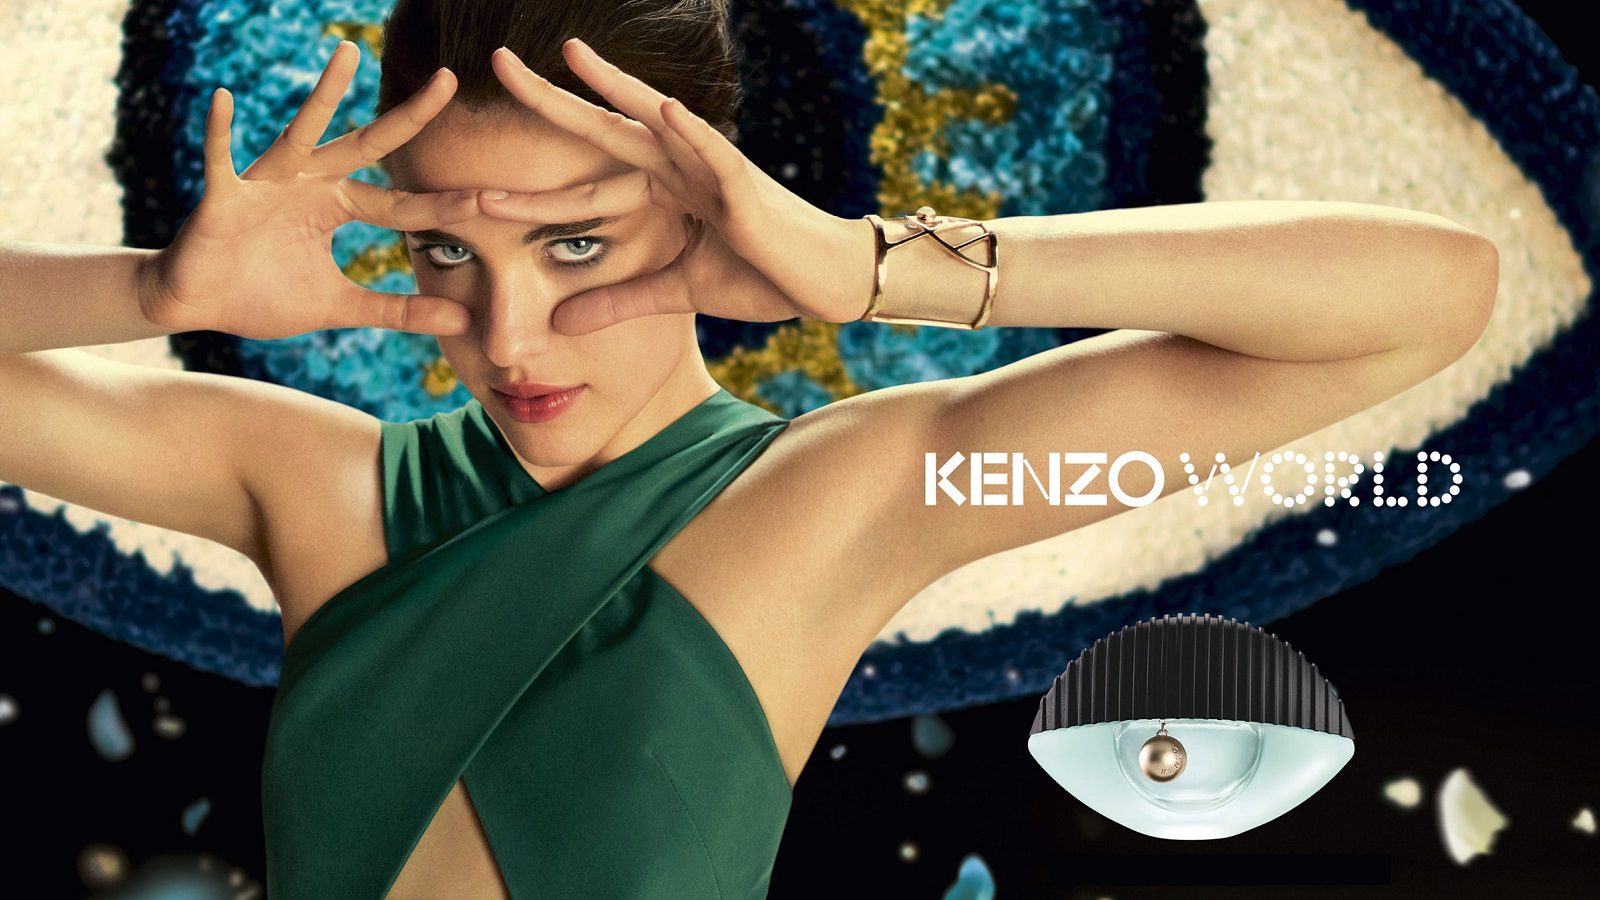 Take a Glance and Dance into the World by Kenzo